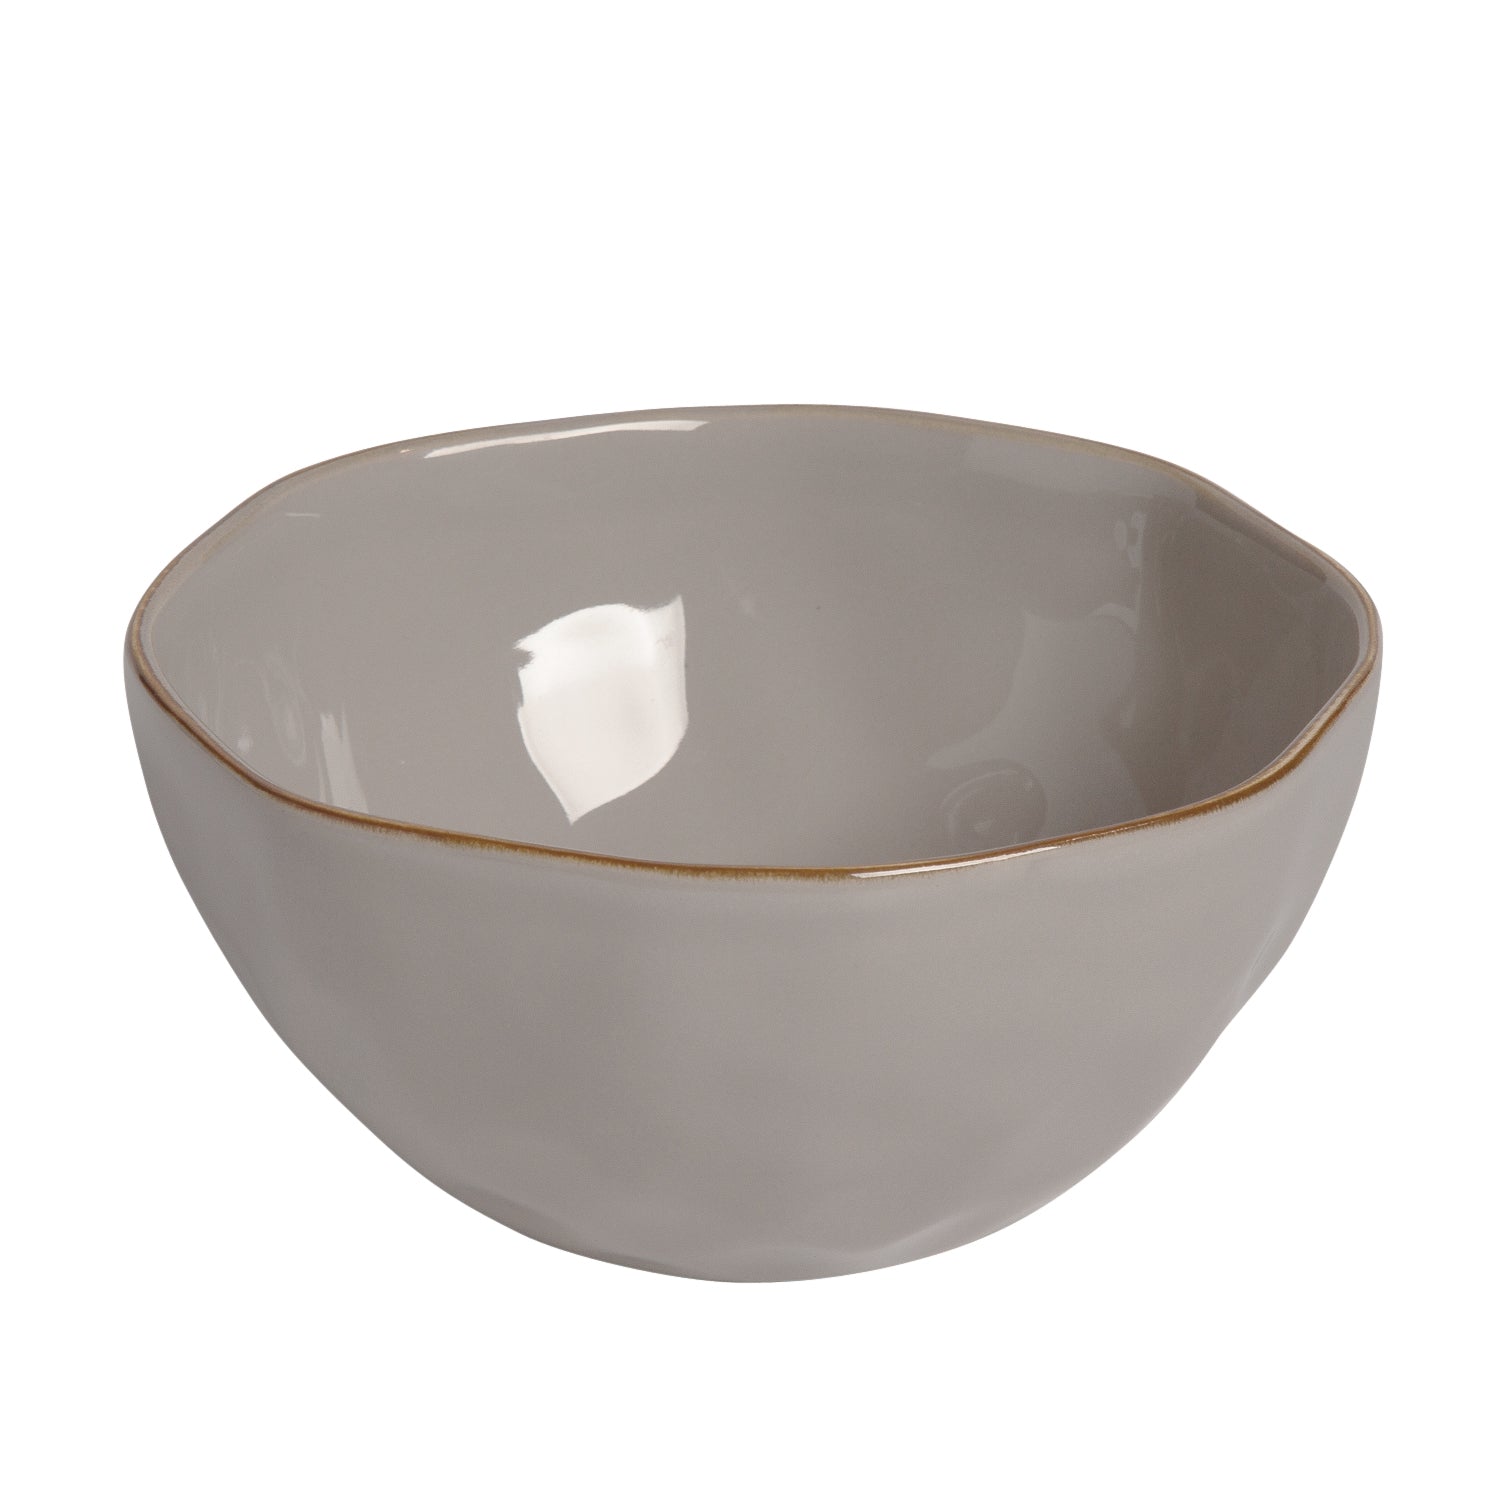 Cantaria Cereal Bowl - Greige